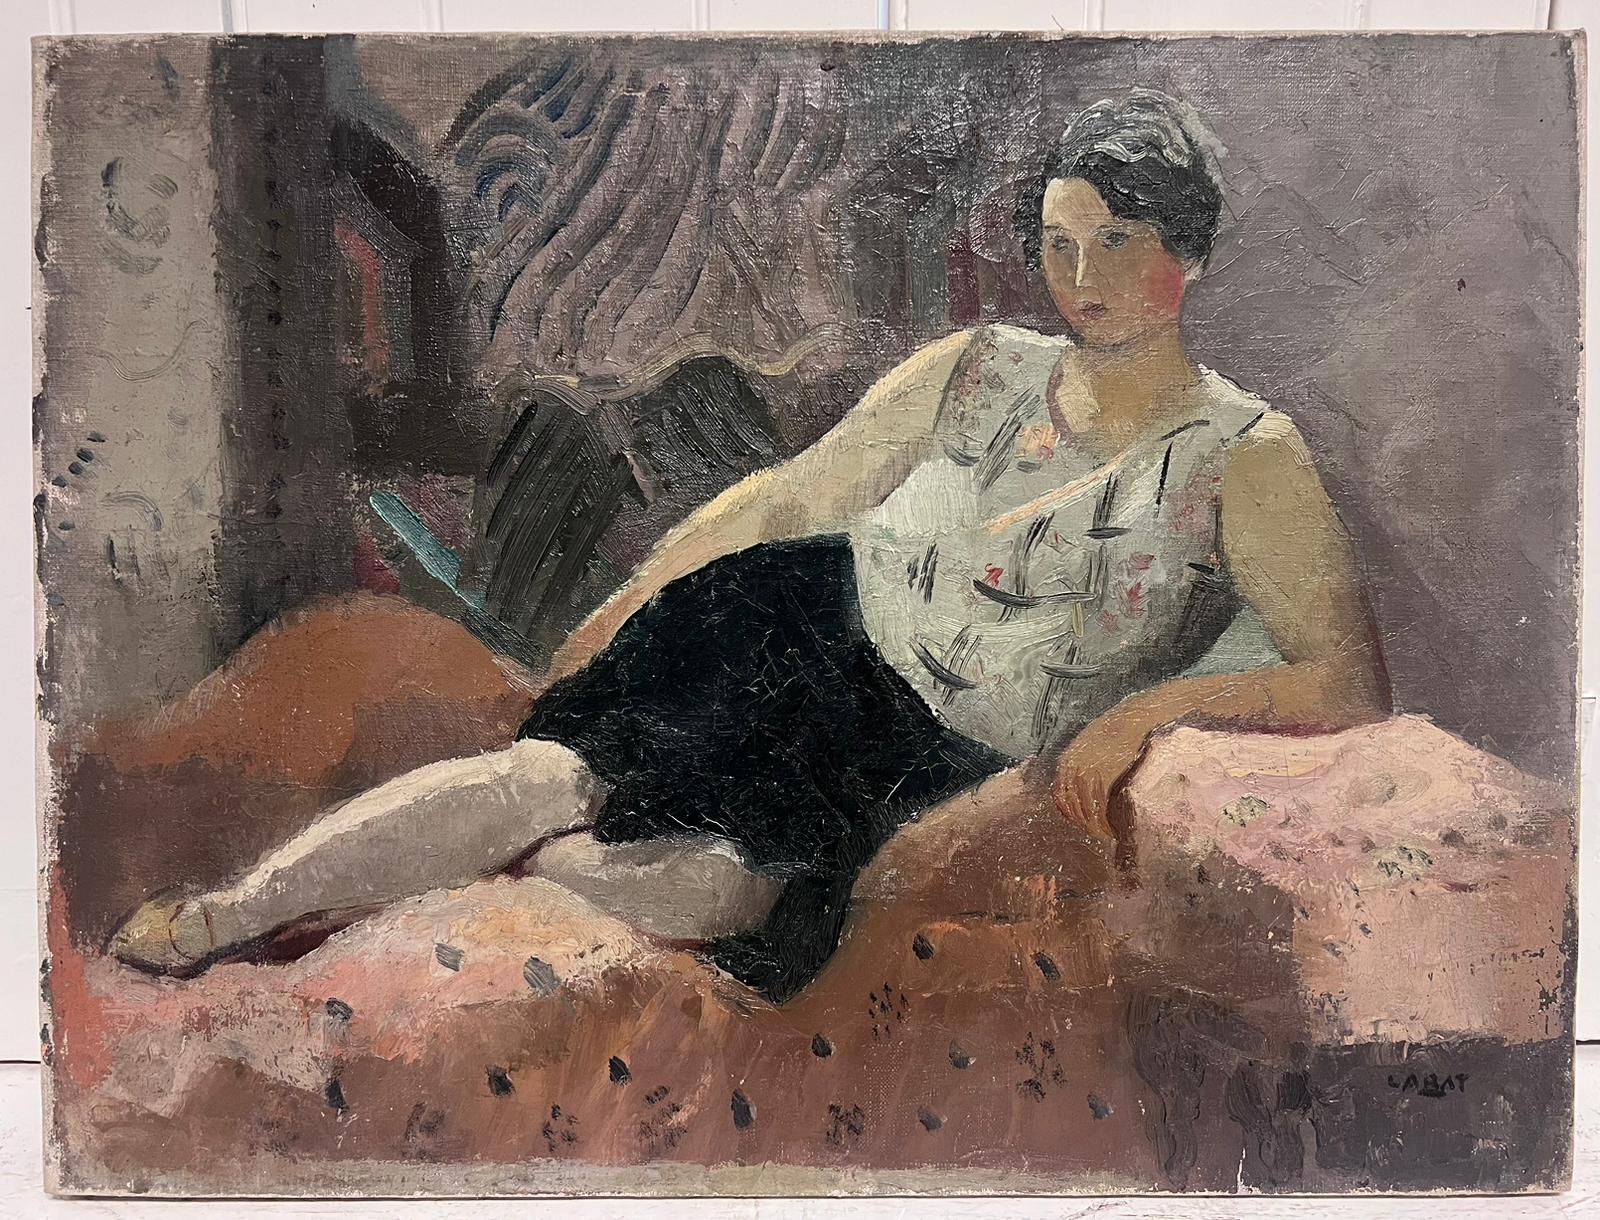 The Reclining Model
French School, mid 20th century
signed Labat
oil on canvas, unframed
board: 18 x 24 inches
provenance: private collection, France
condition: very good and sound condition